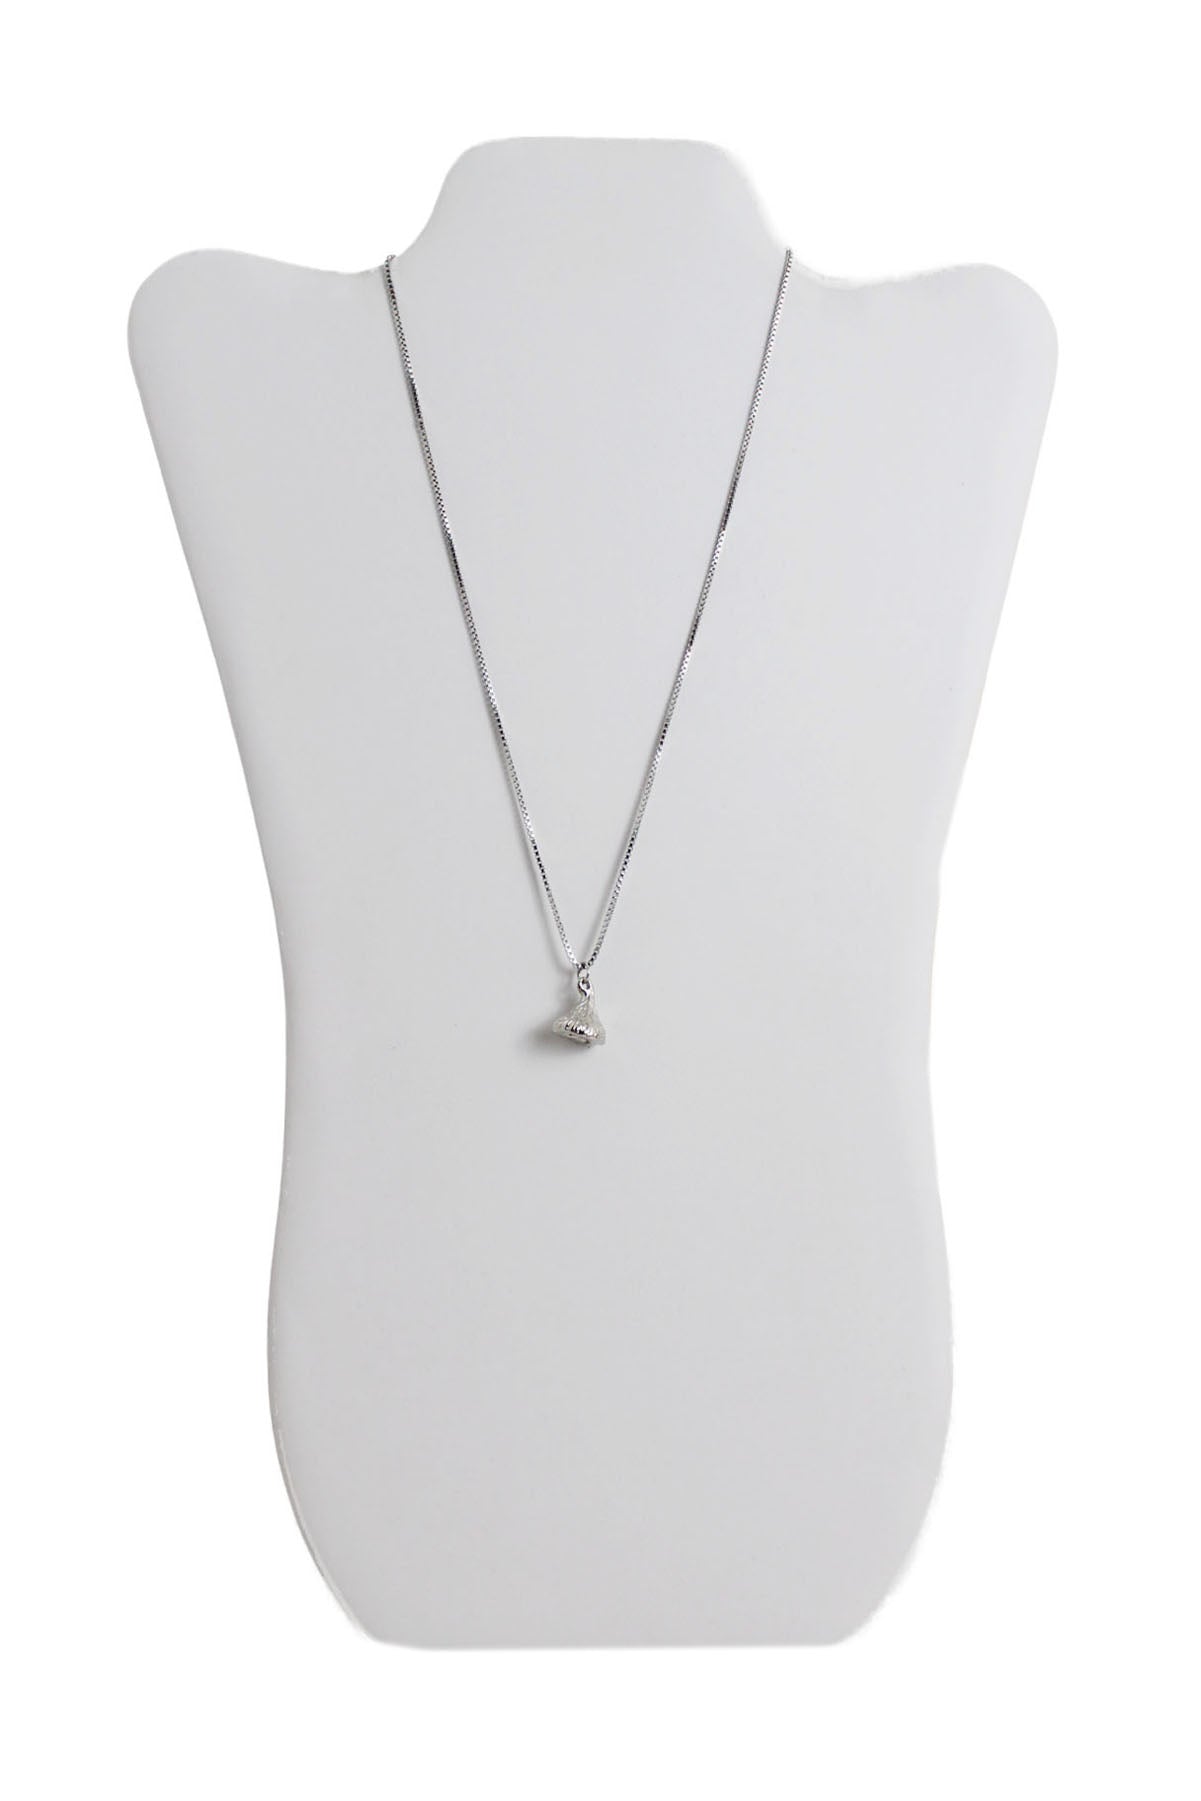 silver toned metallic necklace with a matching chocolate kiss-like pendant staged on neck form